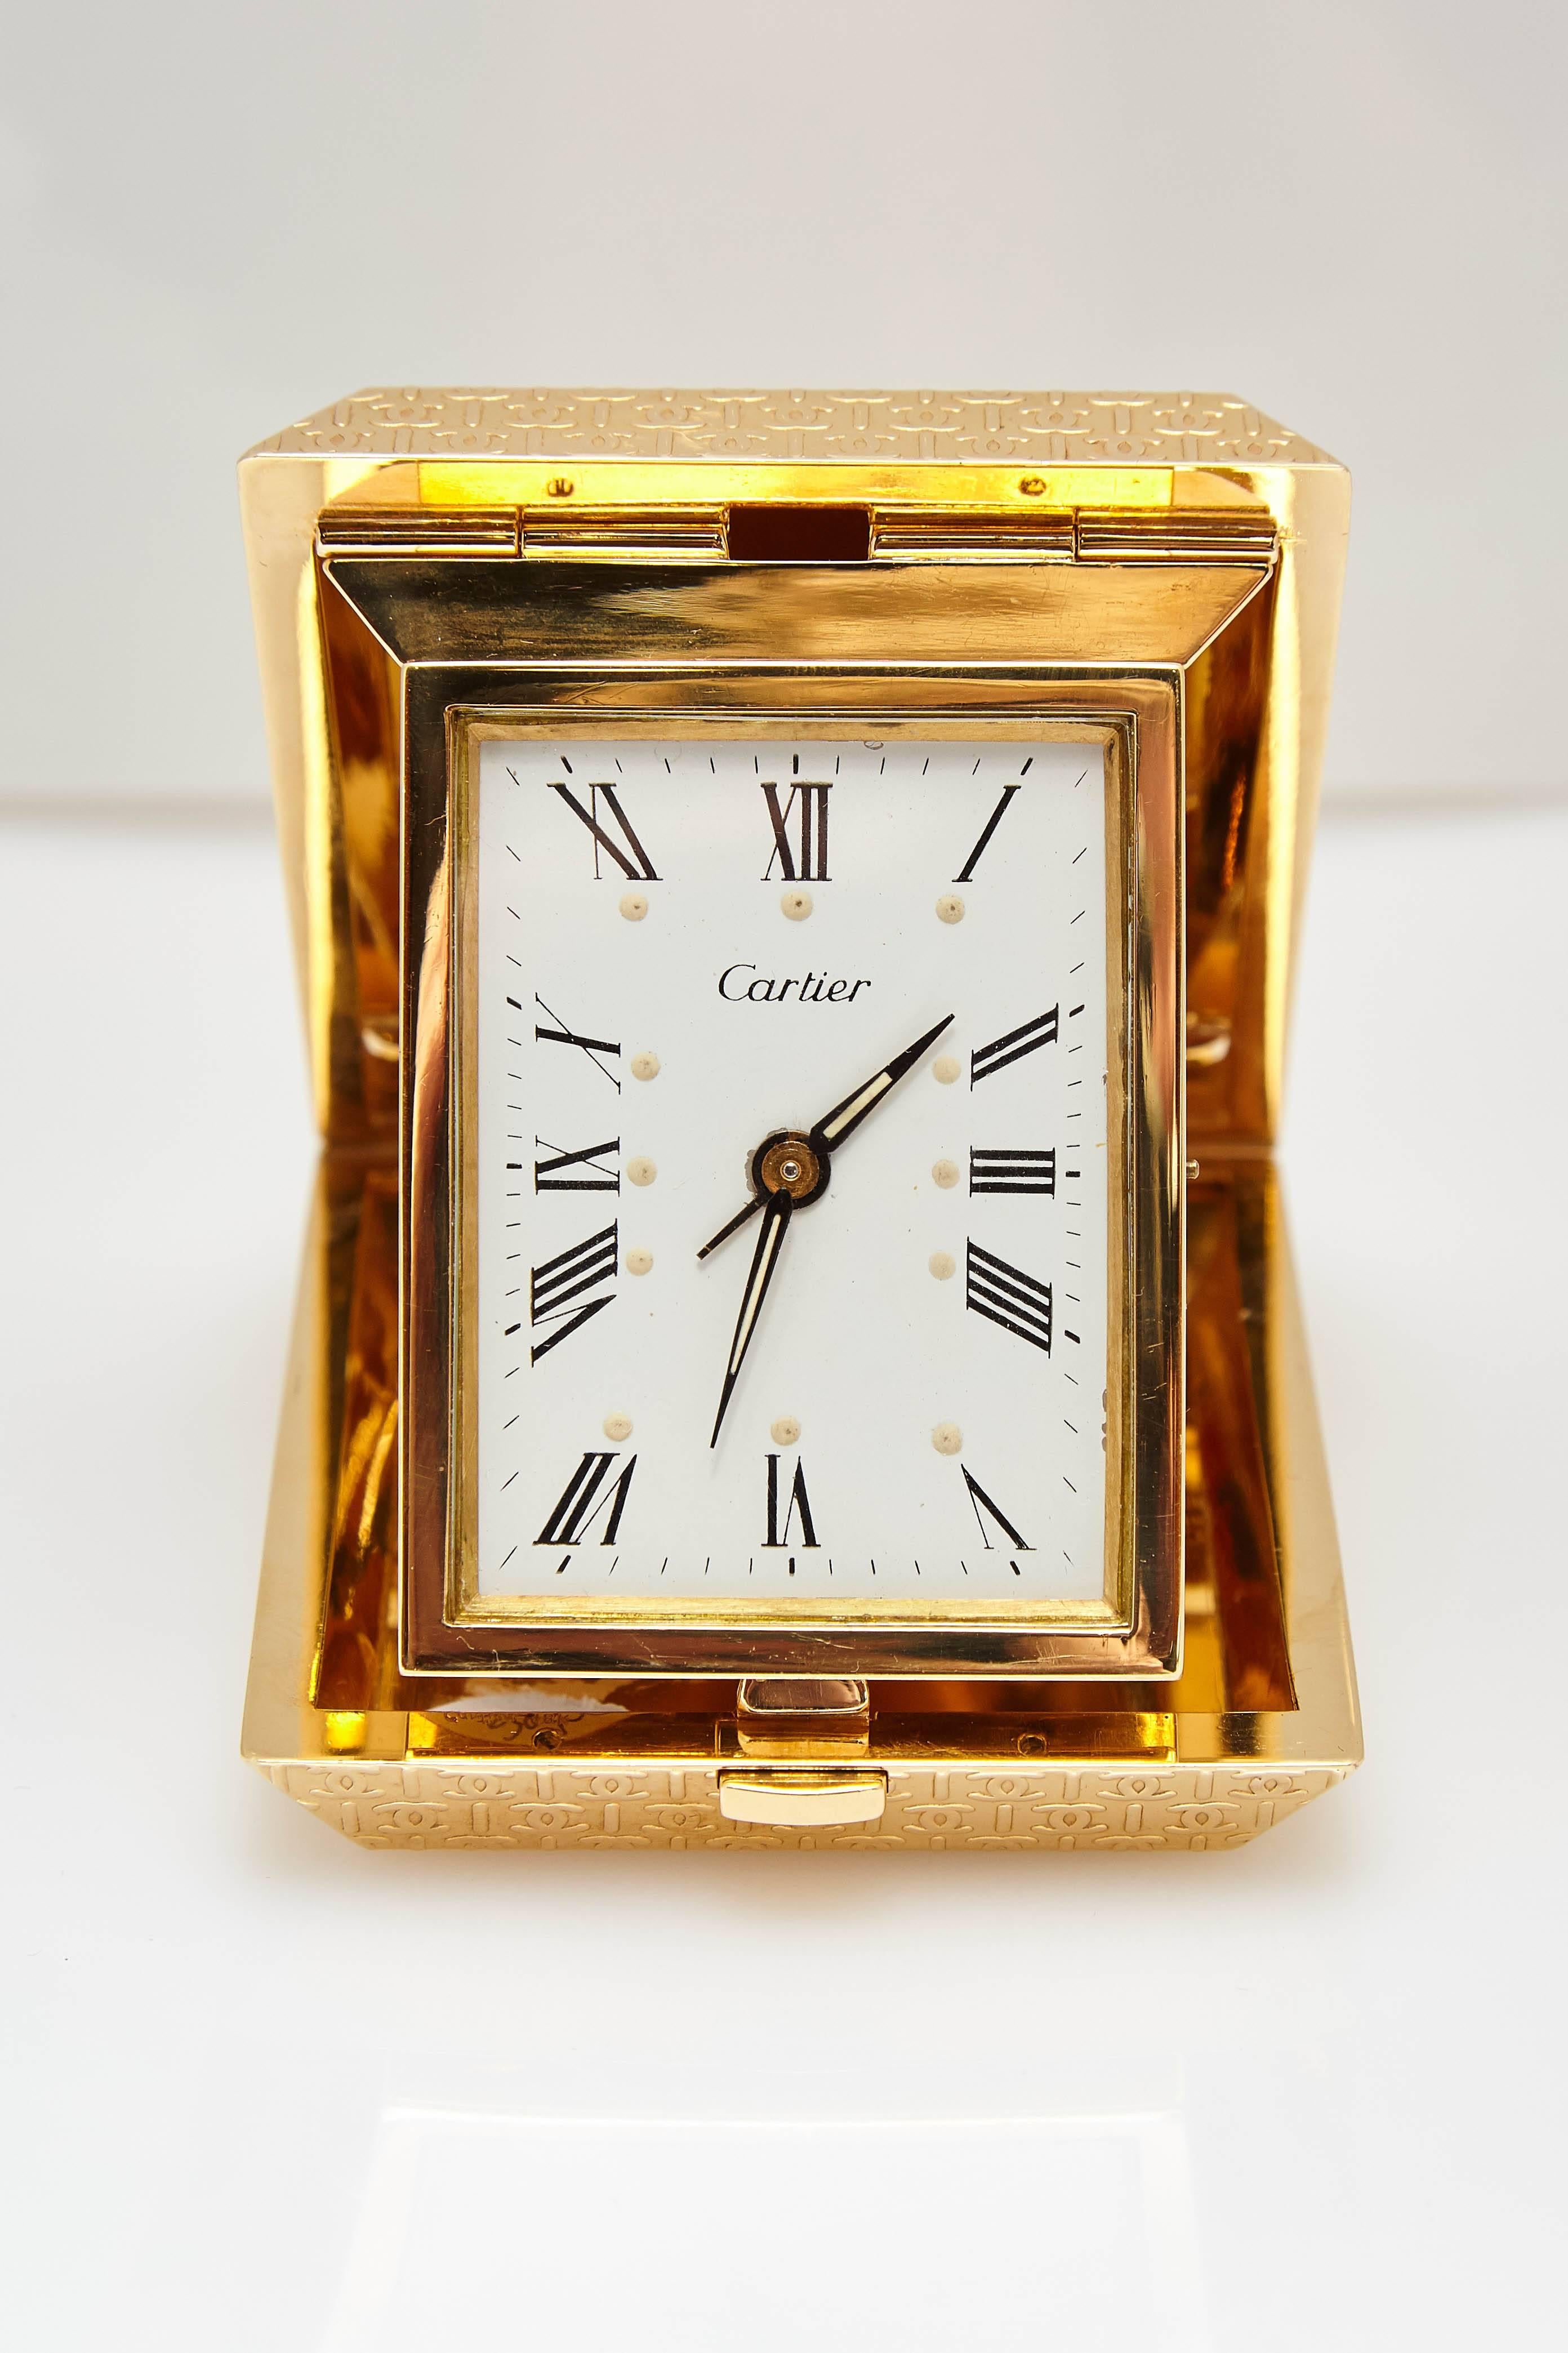 Cartier folding travel clock (with alarm) in 18kt yellow gold. Made in France, circa 1960.